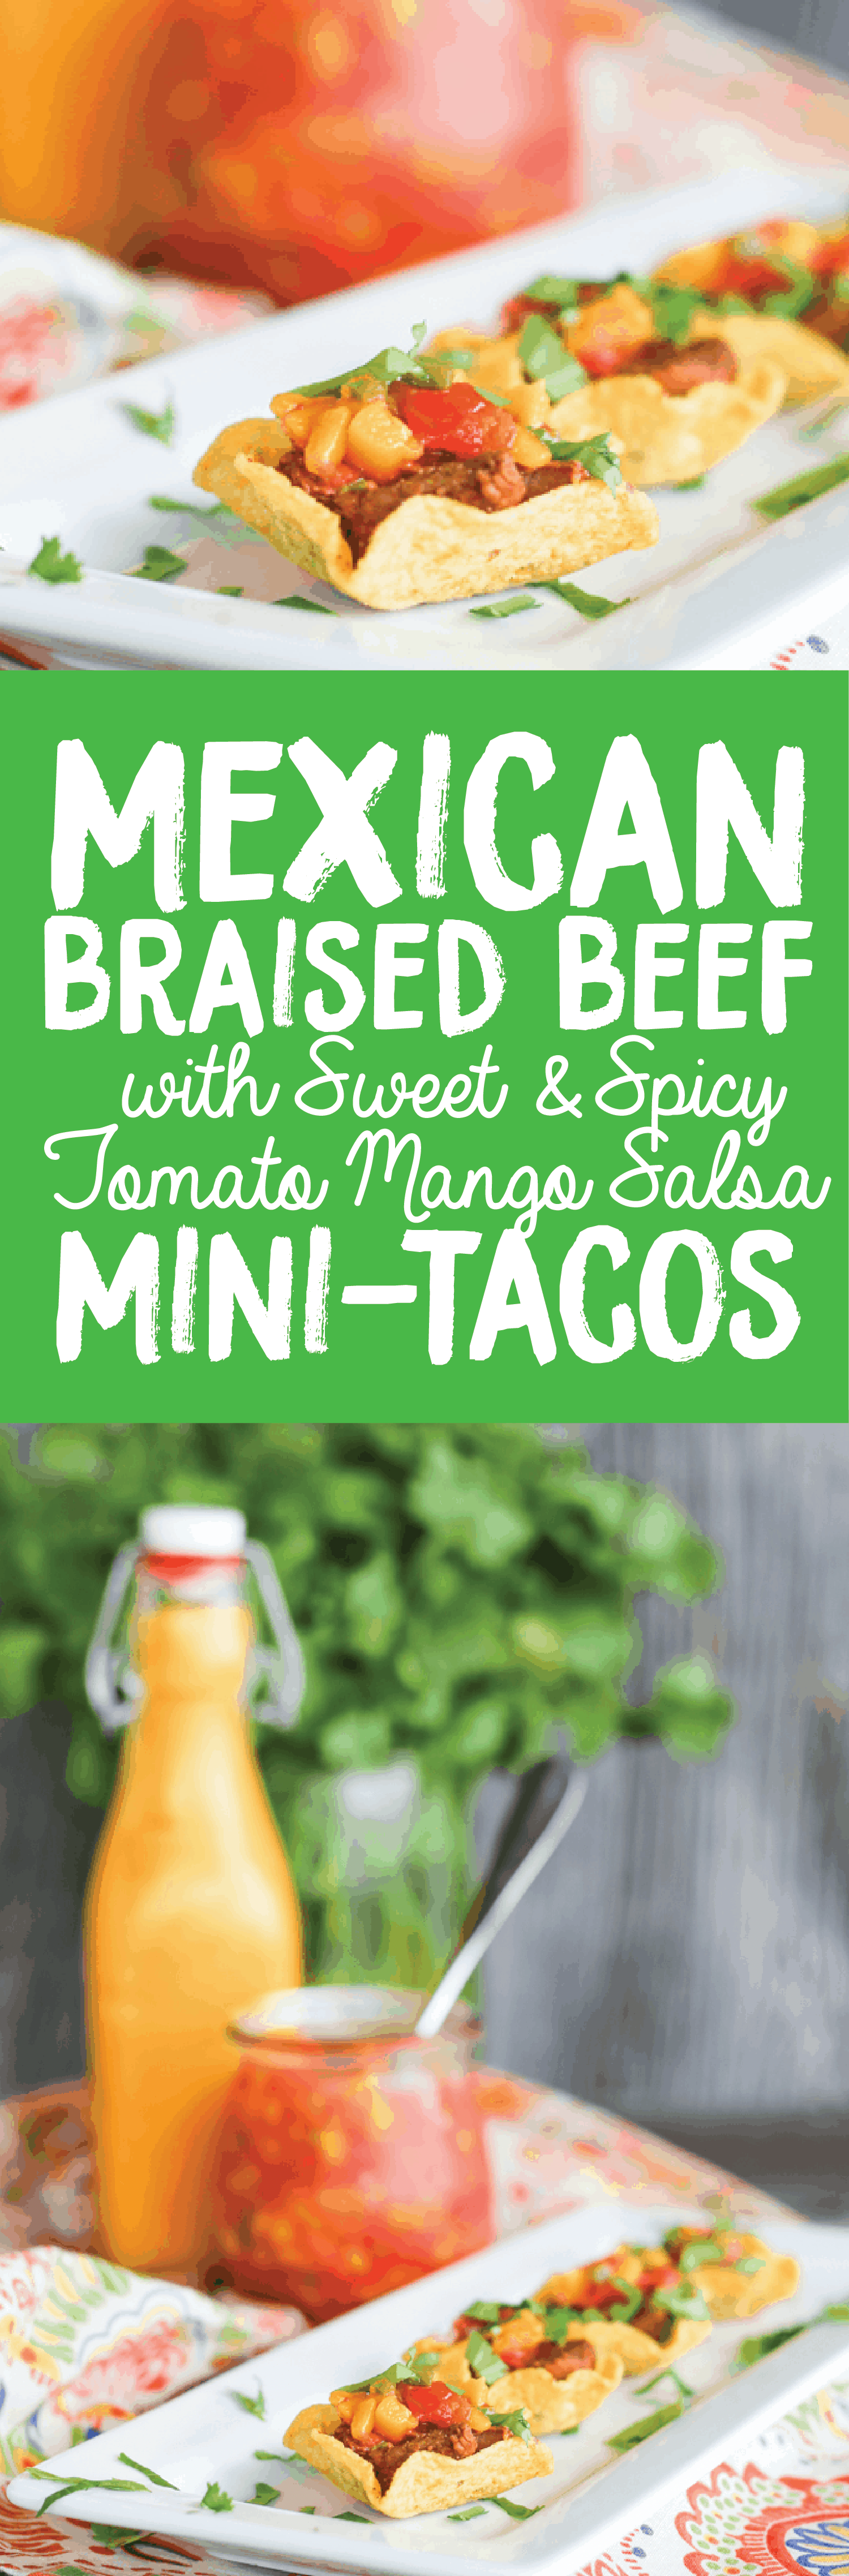 Mini Mexican Braised Beef Tacos